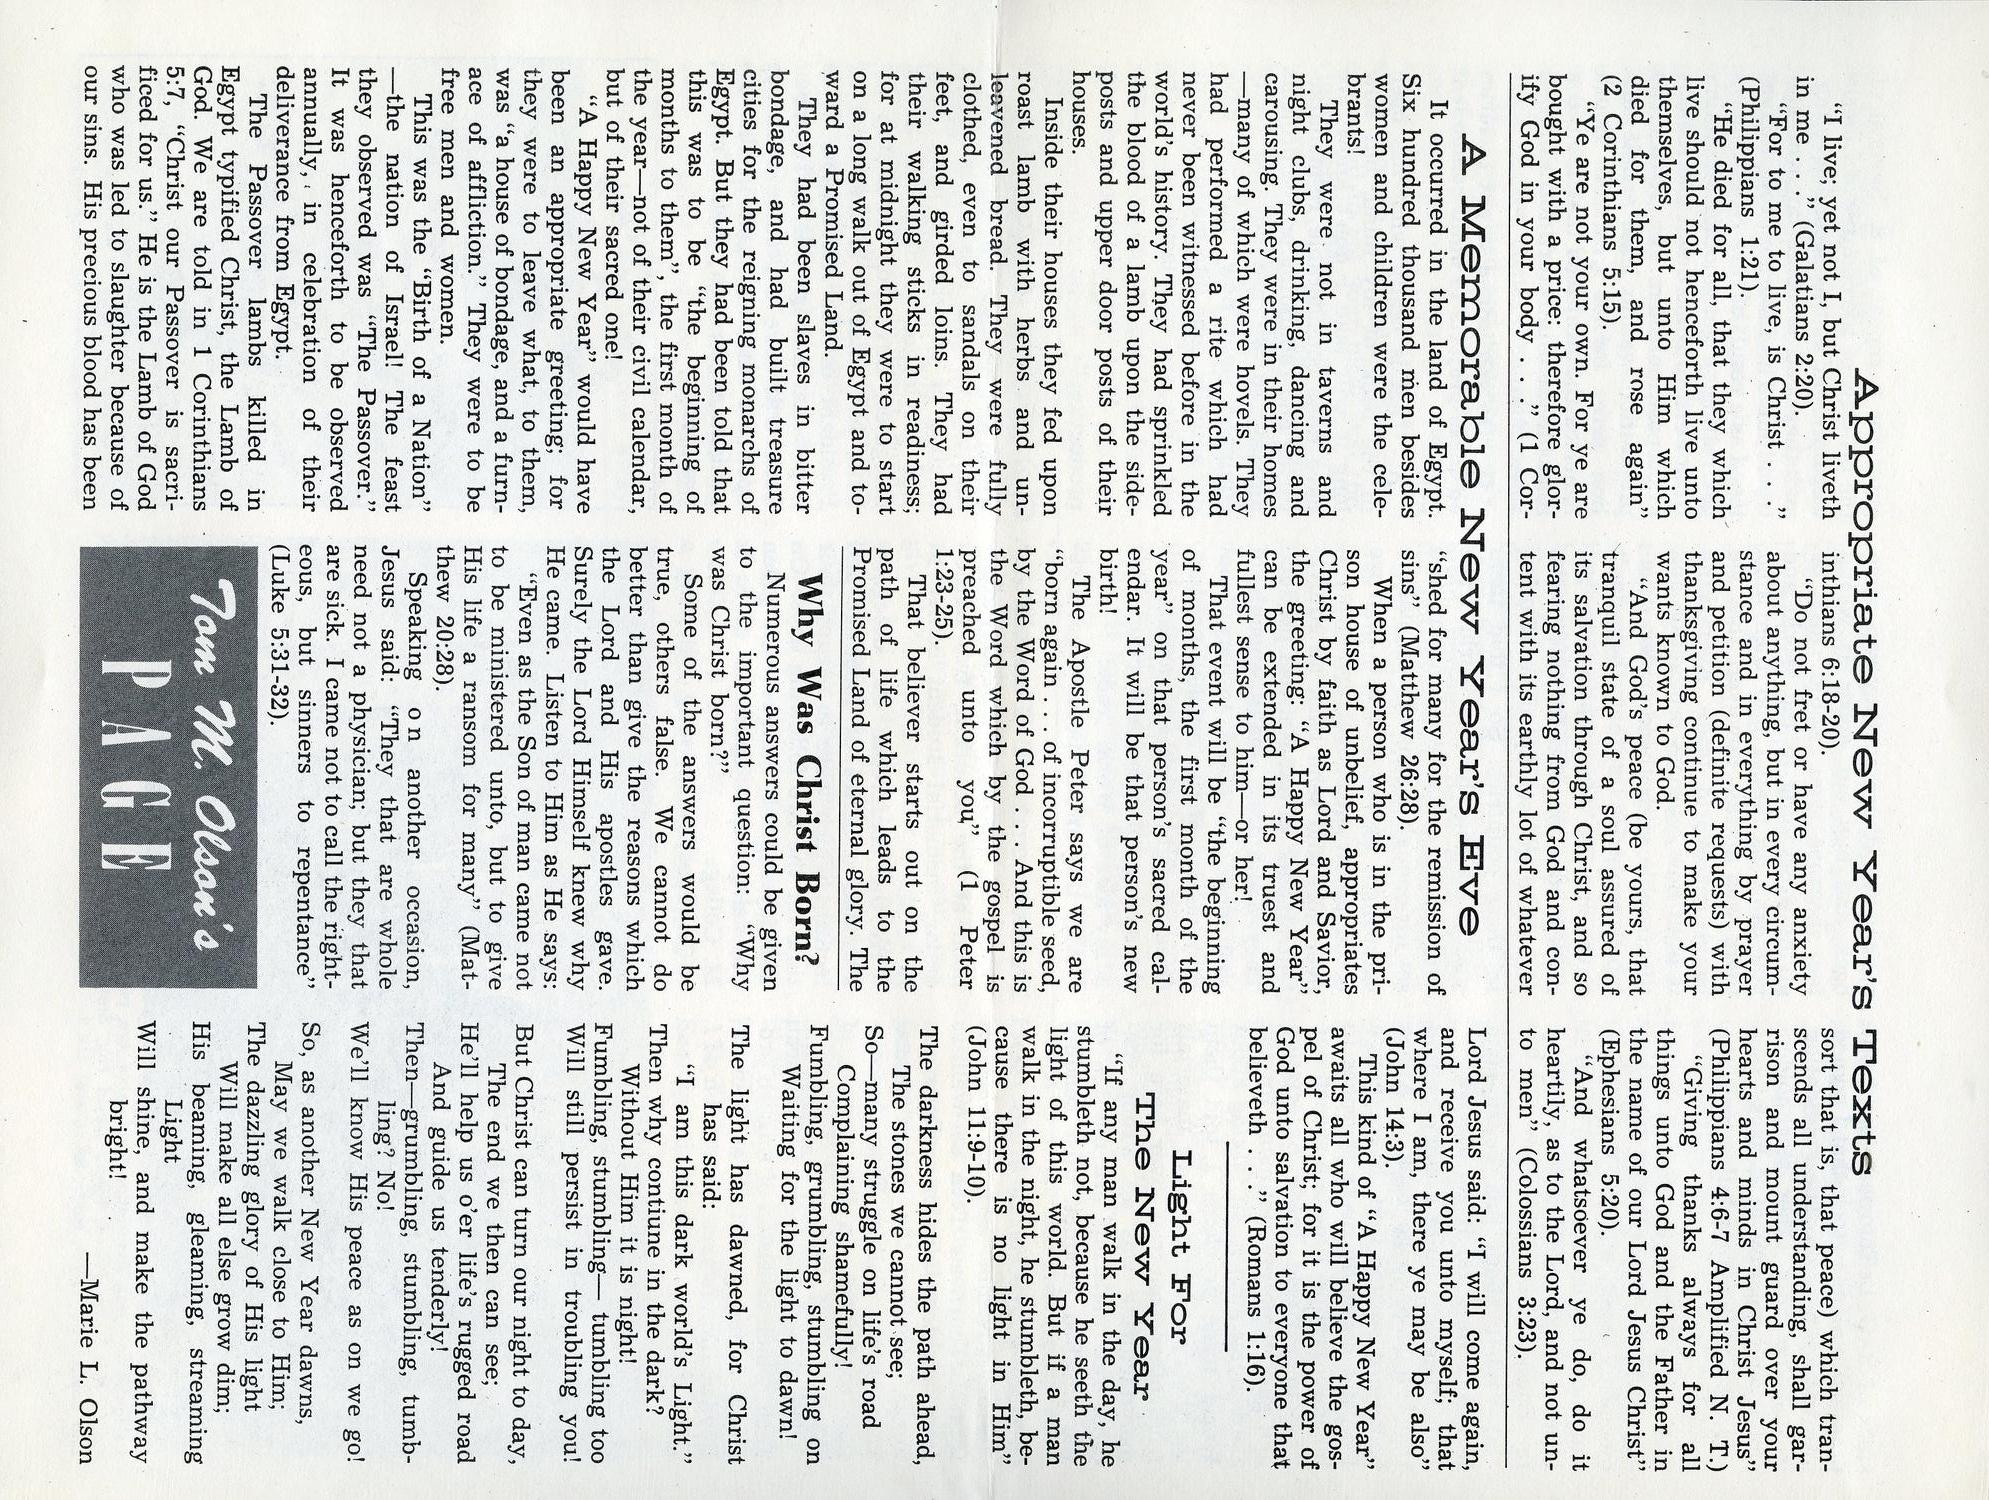 LeTourneau Tech's NOW, Volume 15, Number 1, January 1, 1961
                                                
                                                    5
                                                